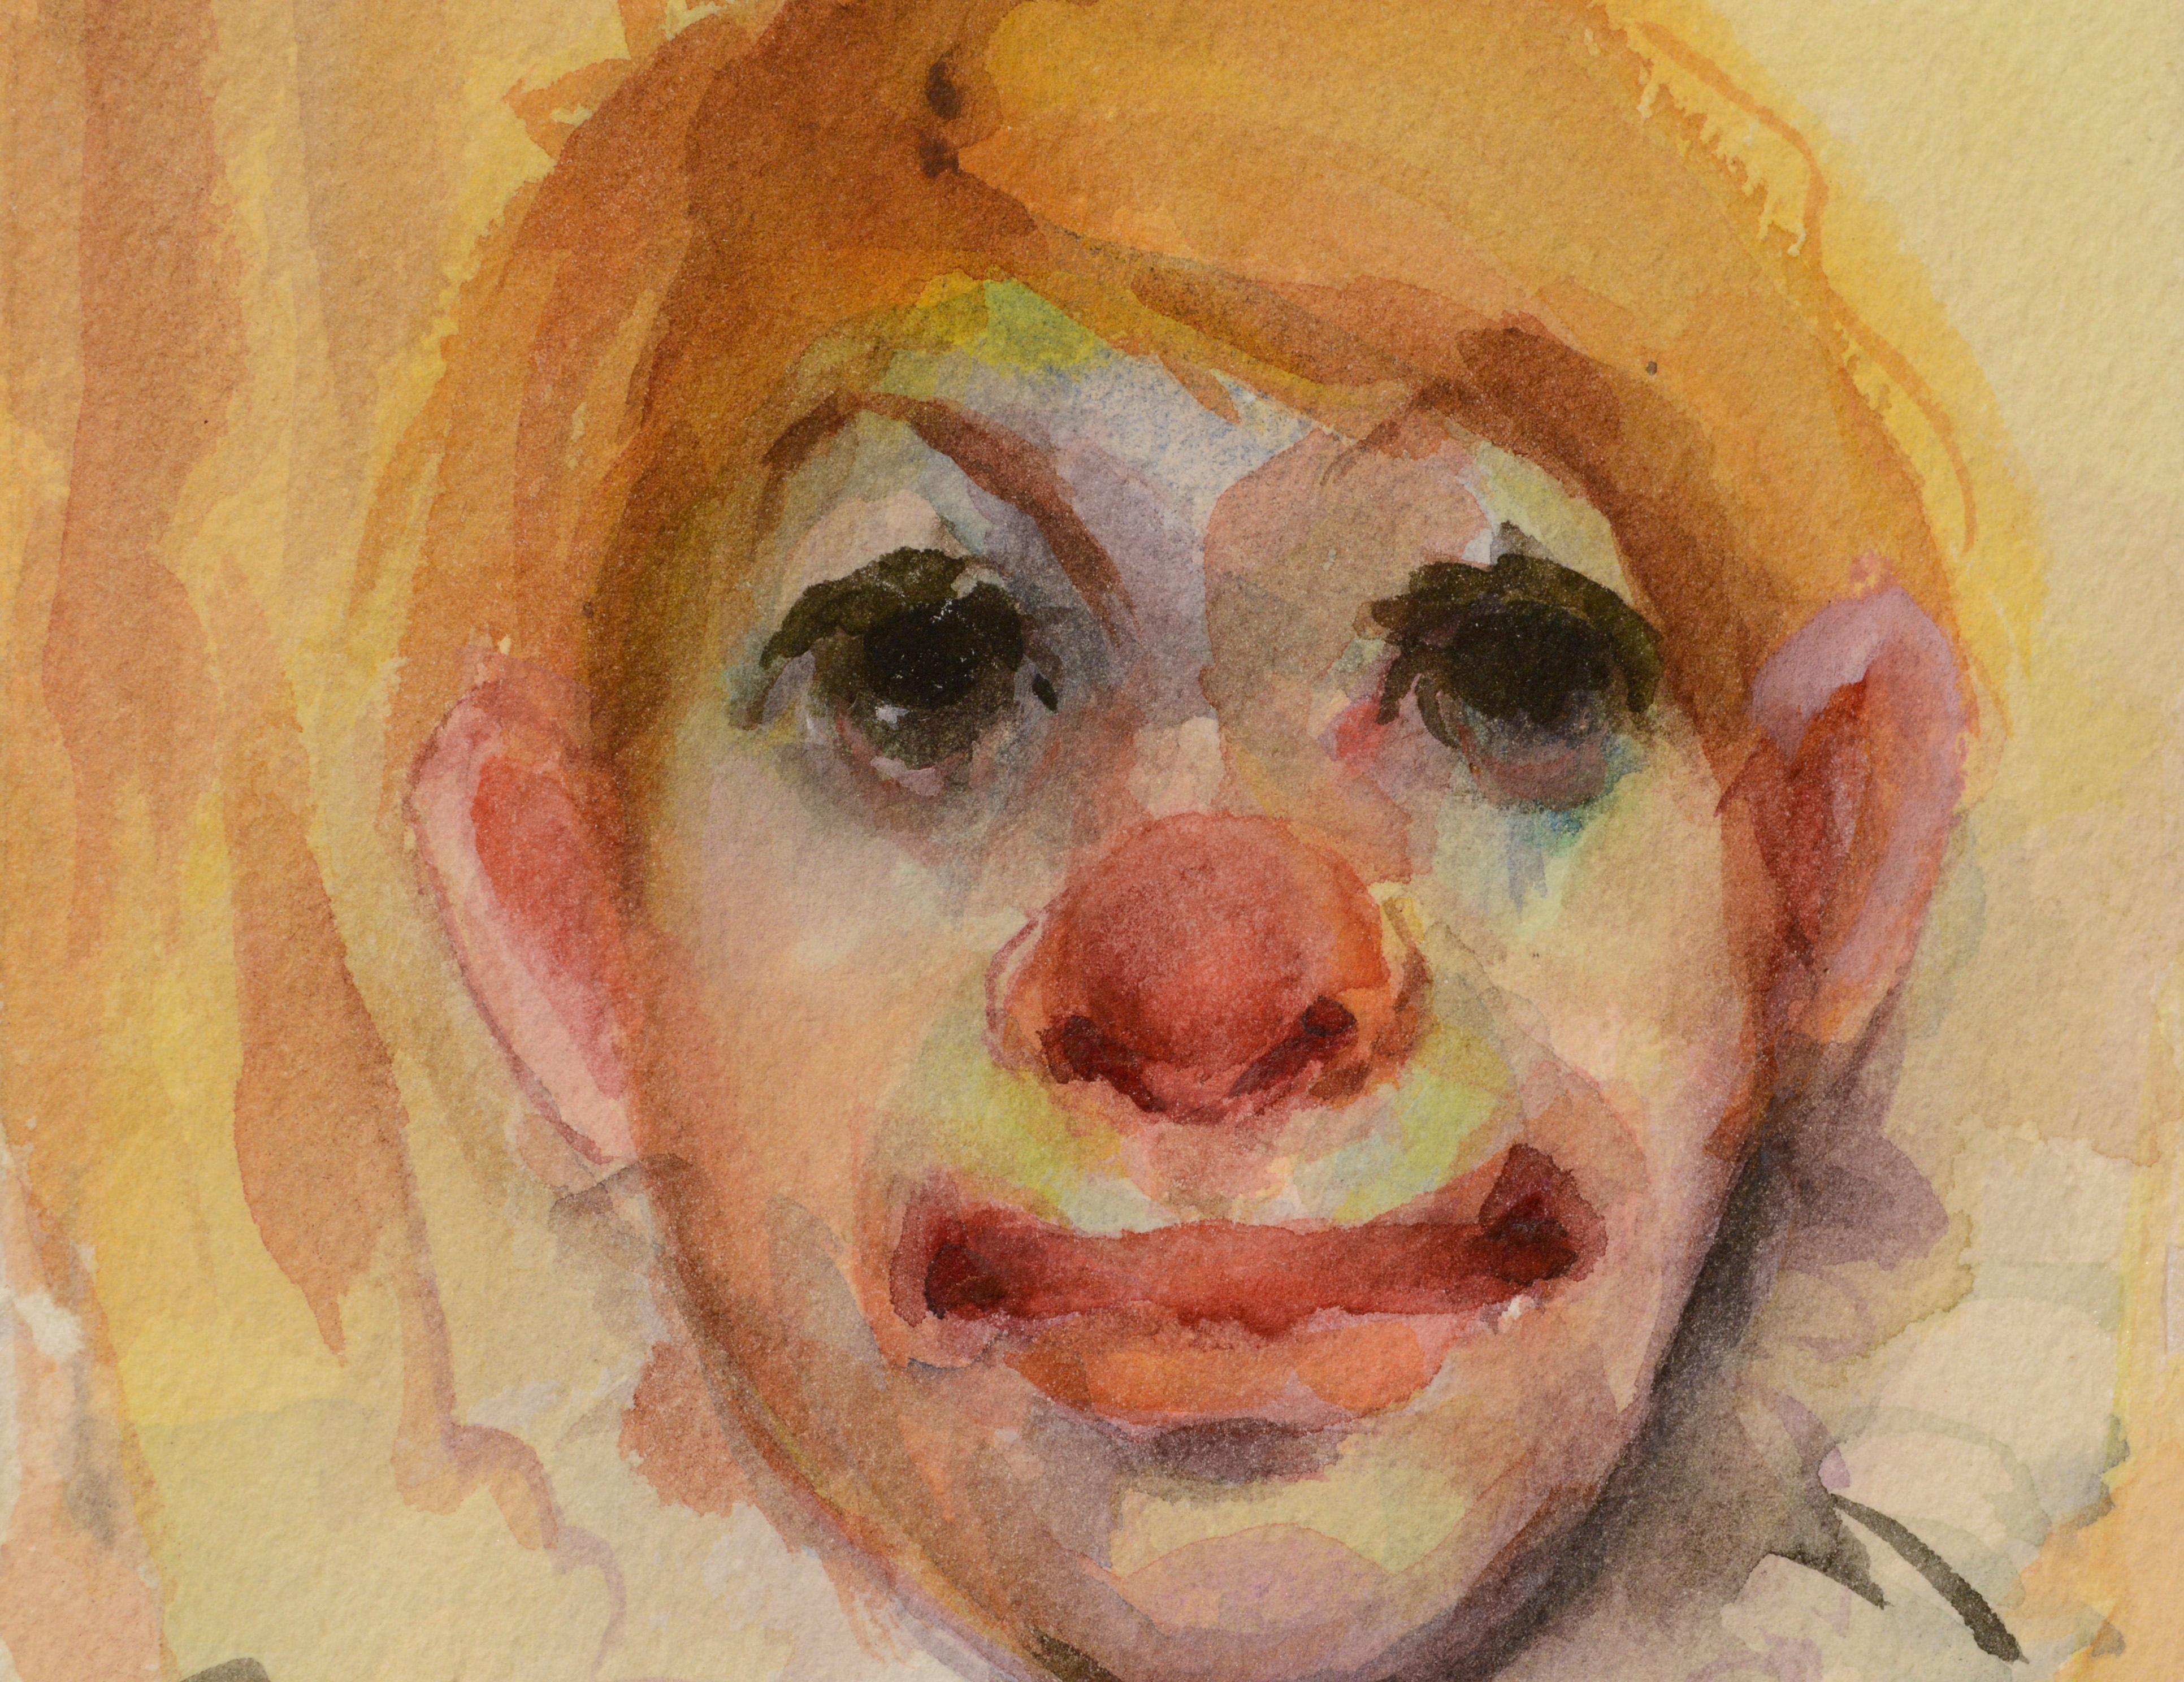 Clown Portrait #7 - Painting by Marjorie May Blake